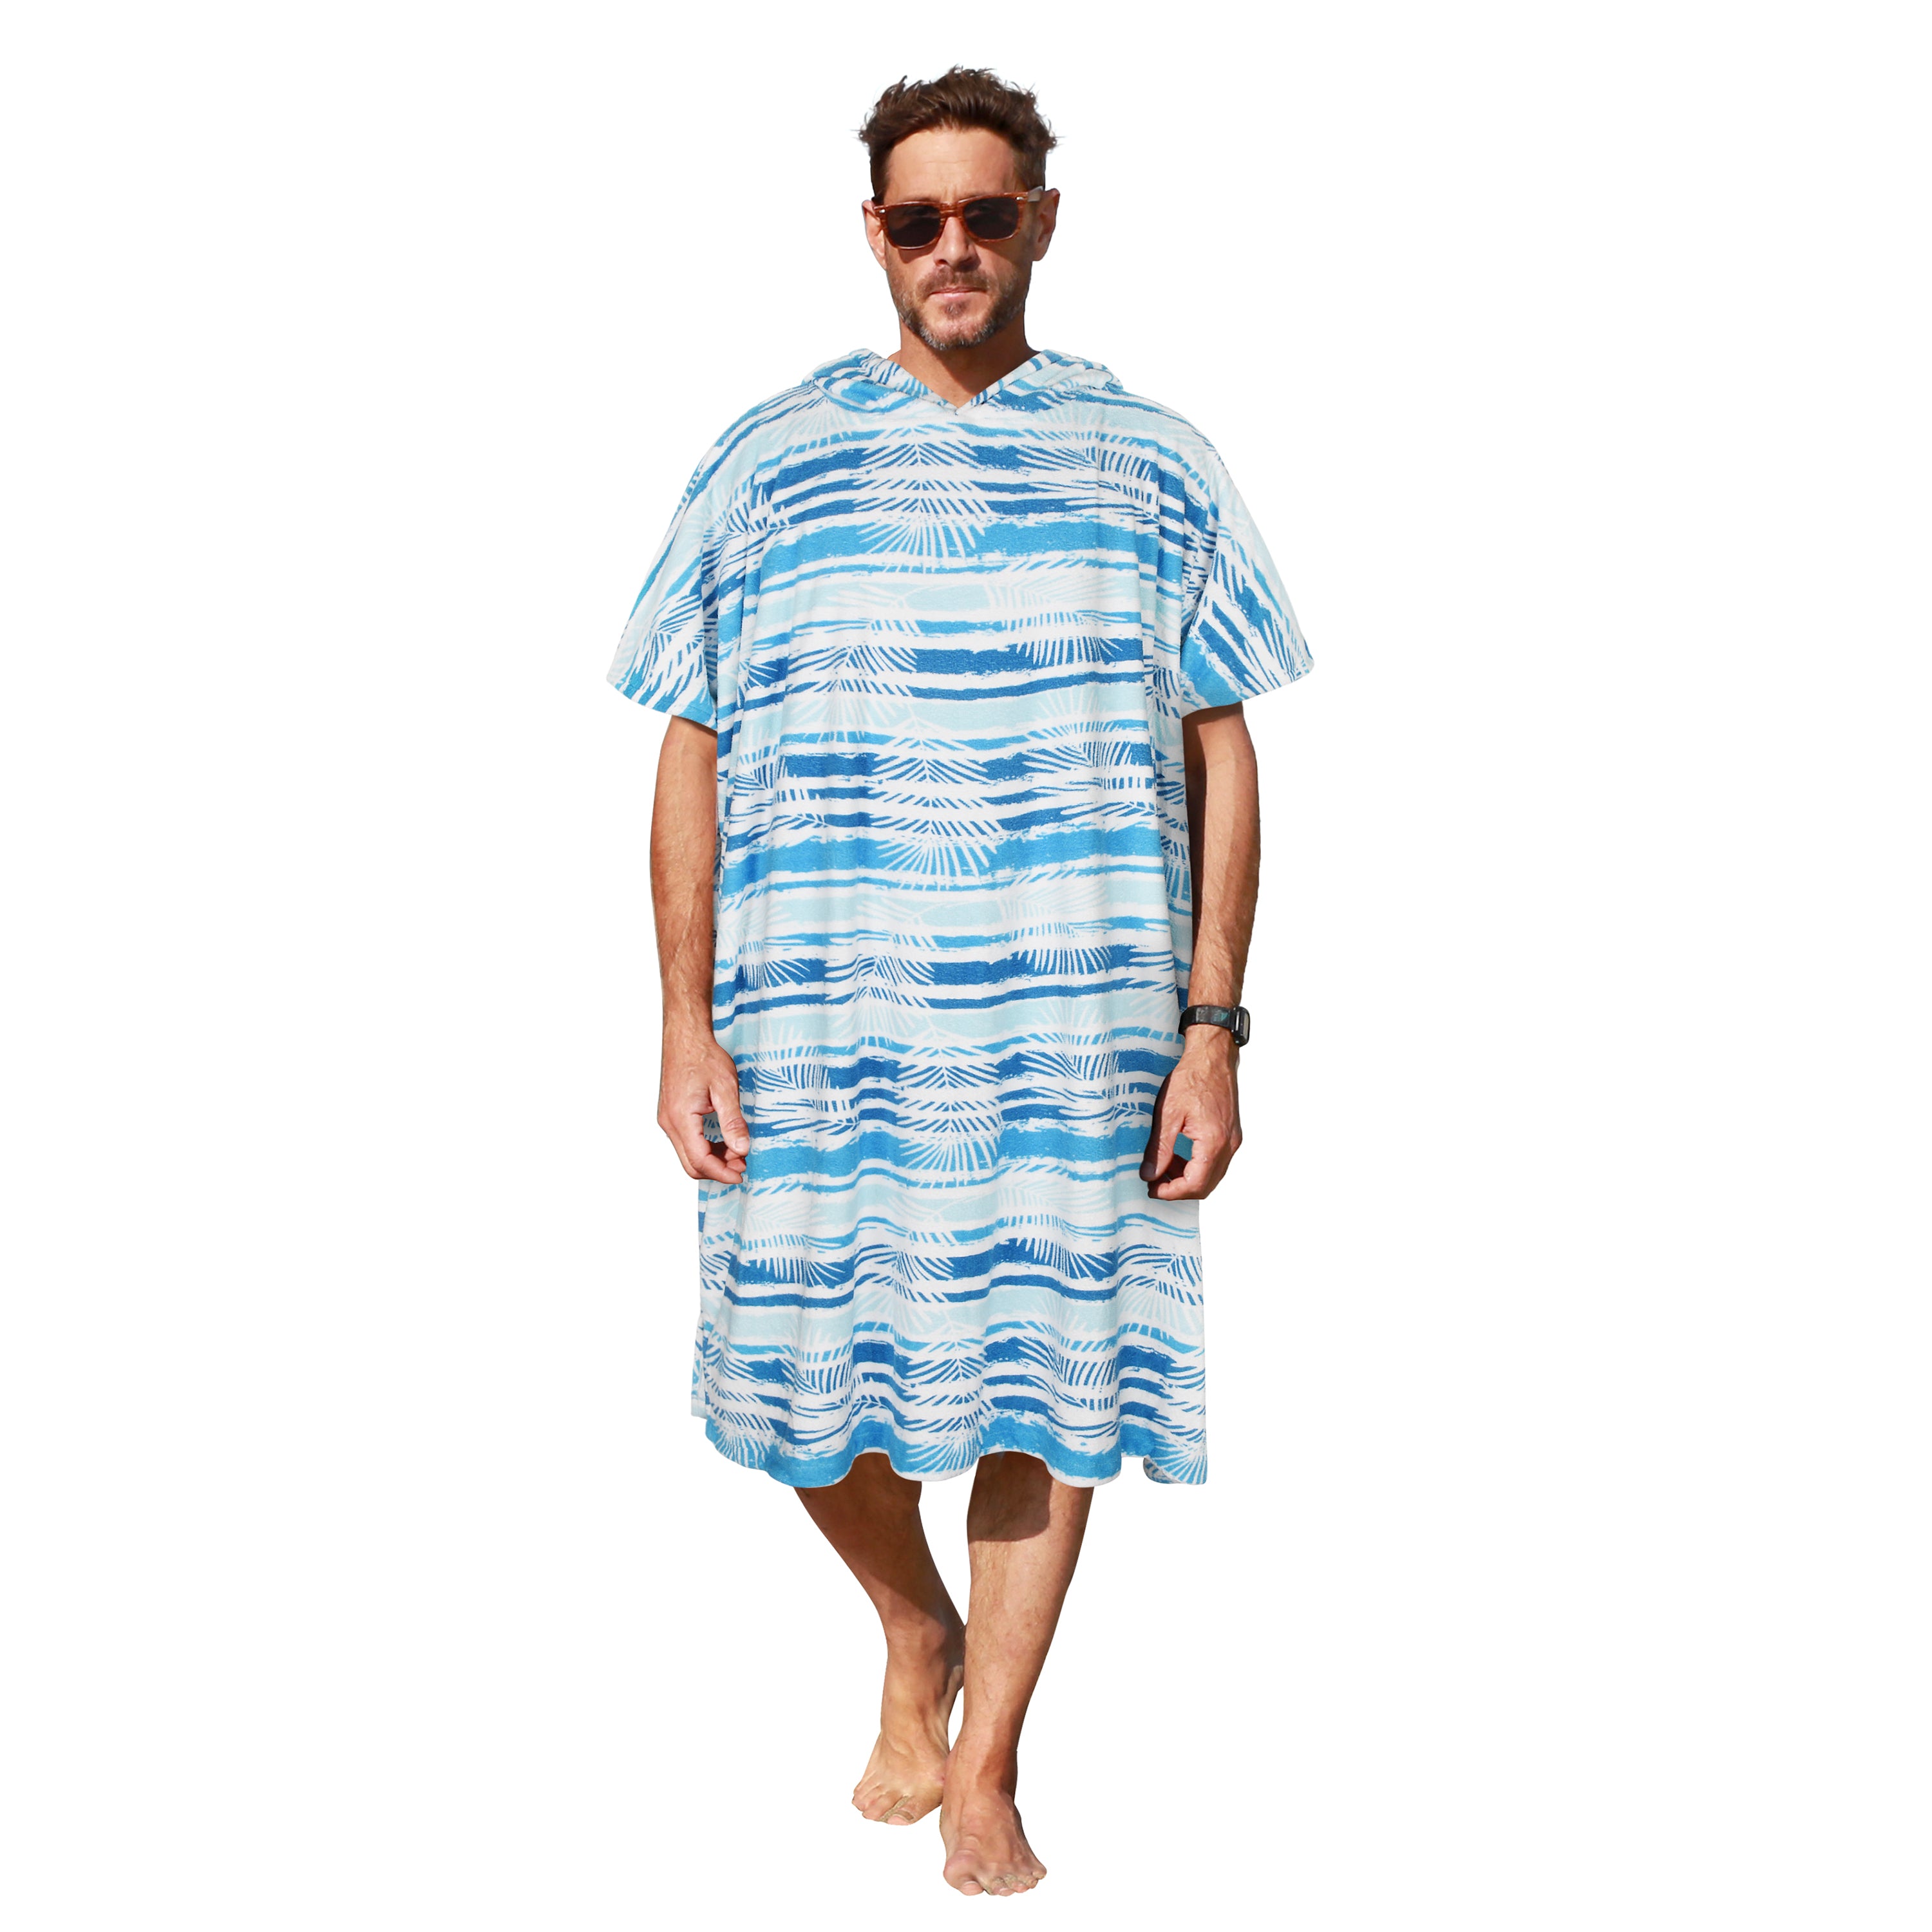 DORSAL Thick Microfiber Surf Poncho Robe for Wetsuit Changing Towel –  DORSAL®